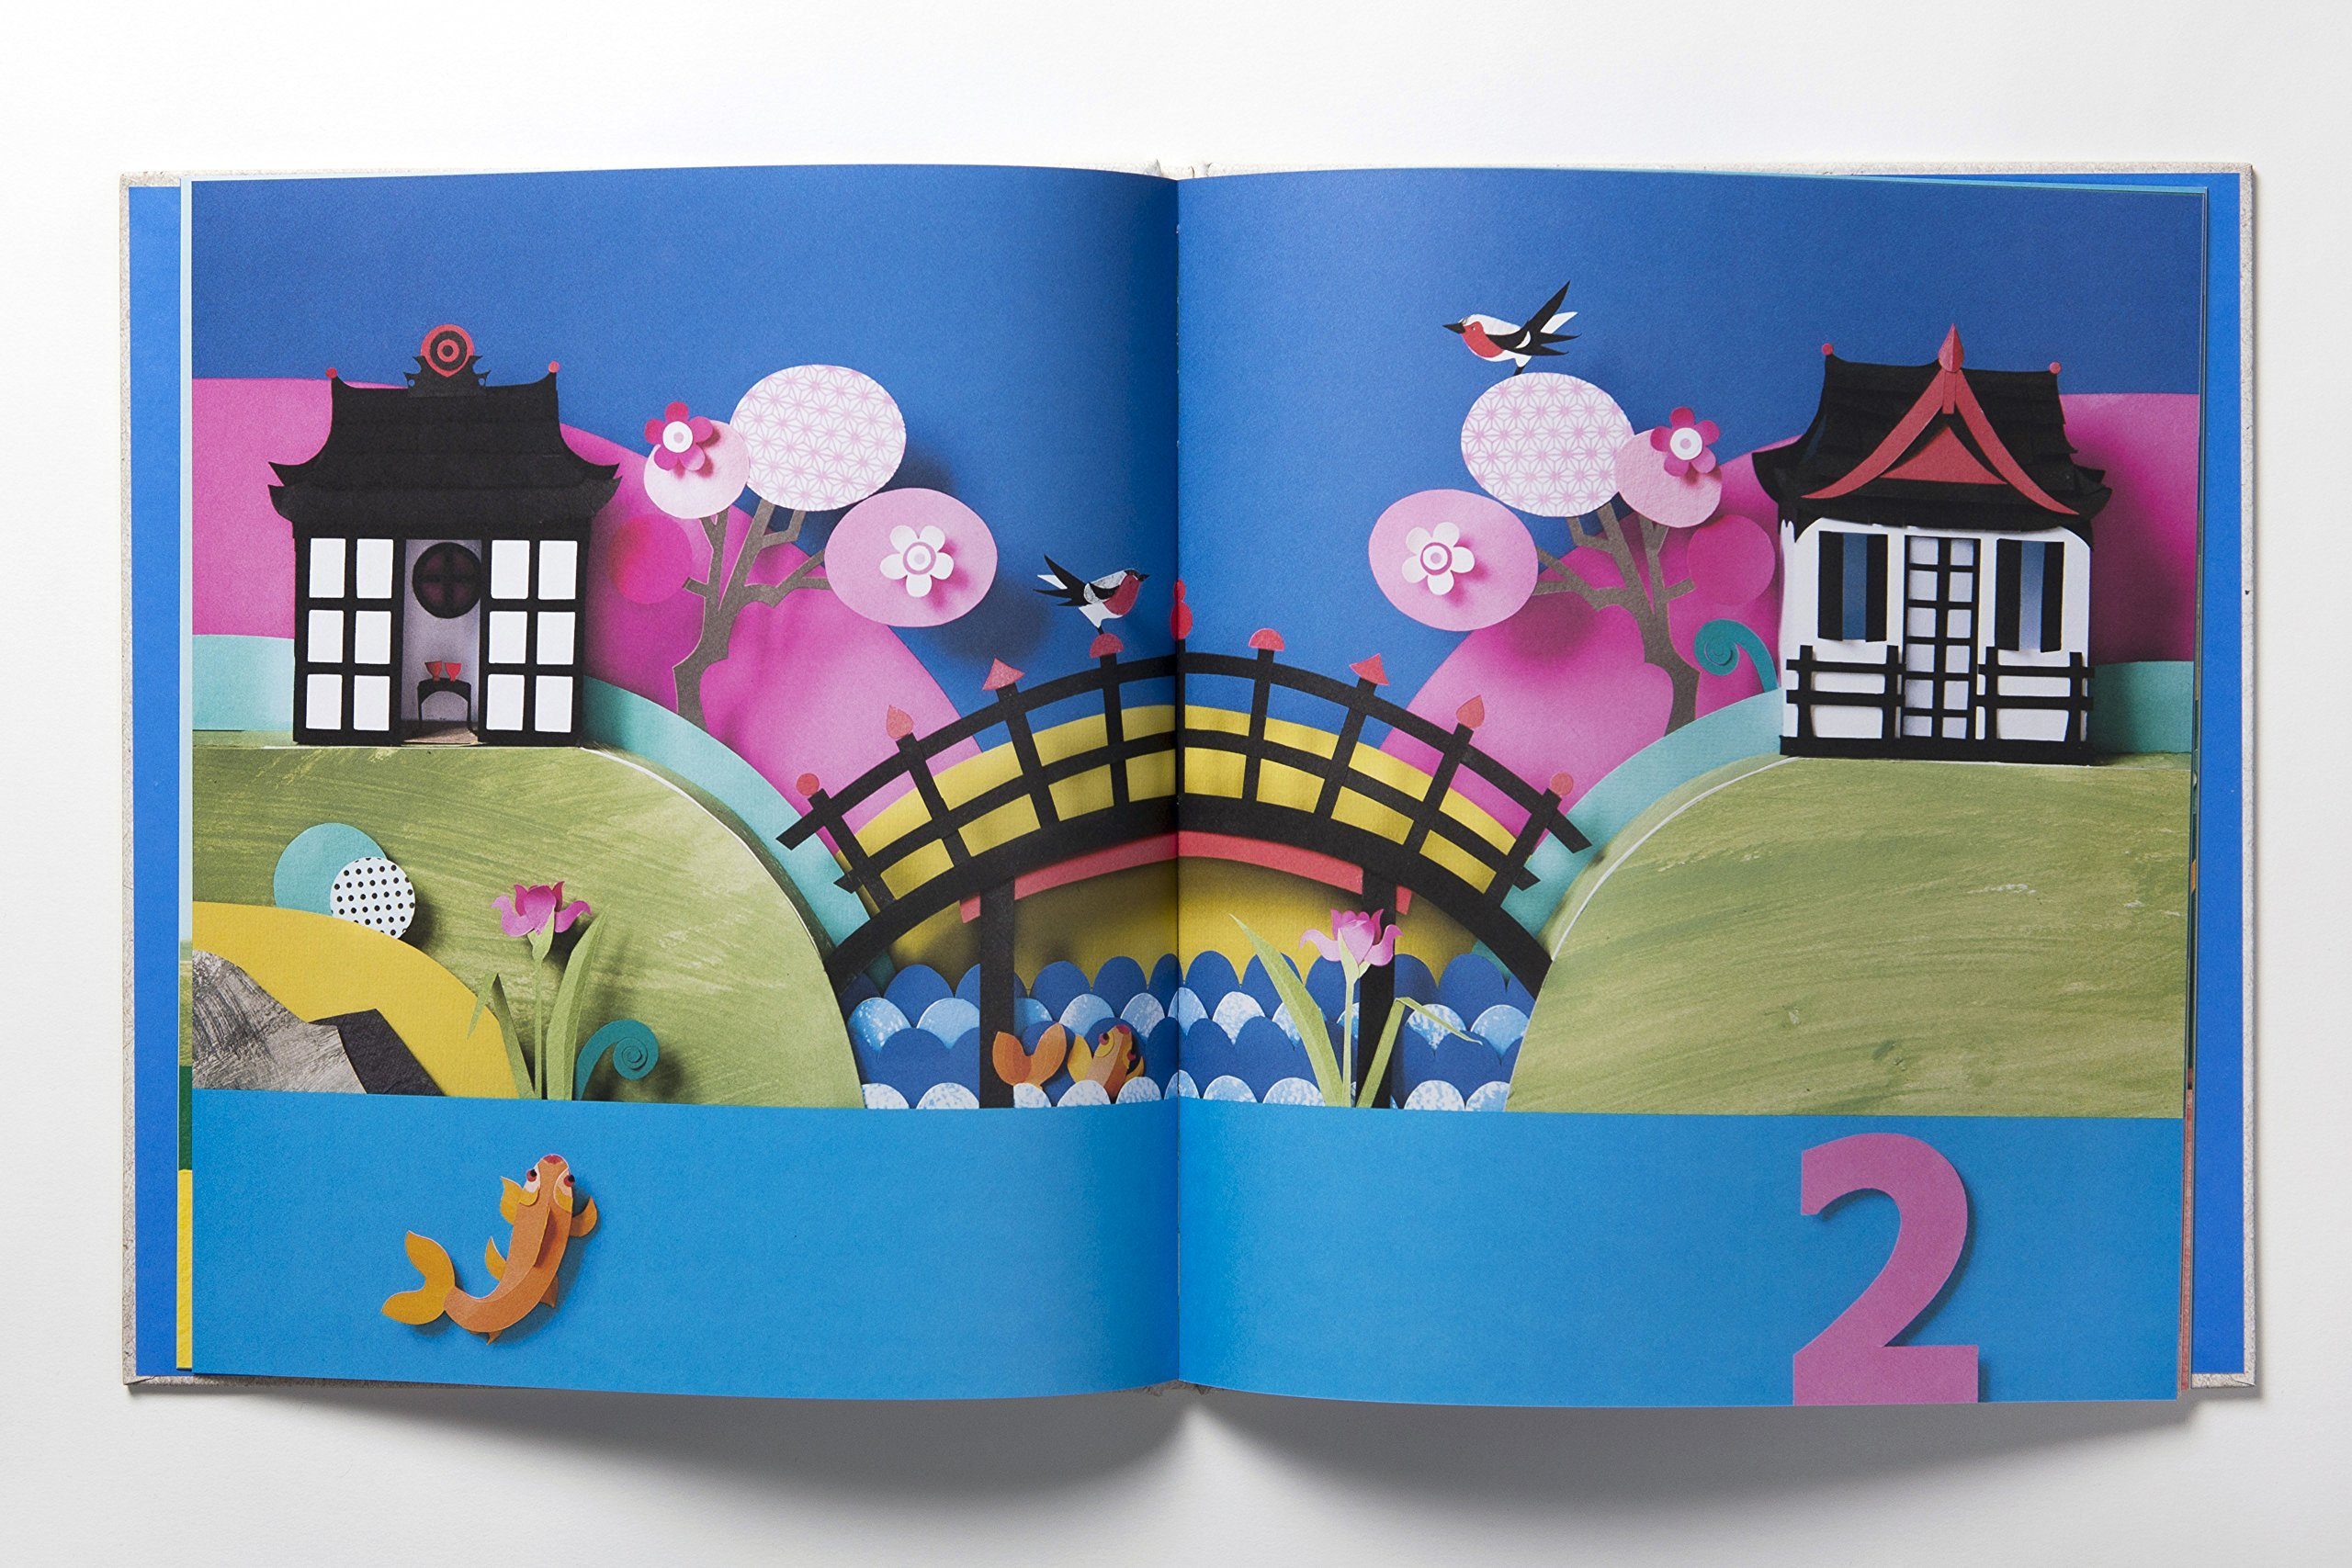 Little Houses: A Counting Book (Arriving End of Jan) Beaglier Books 